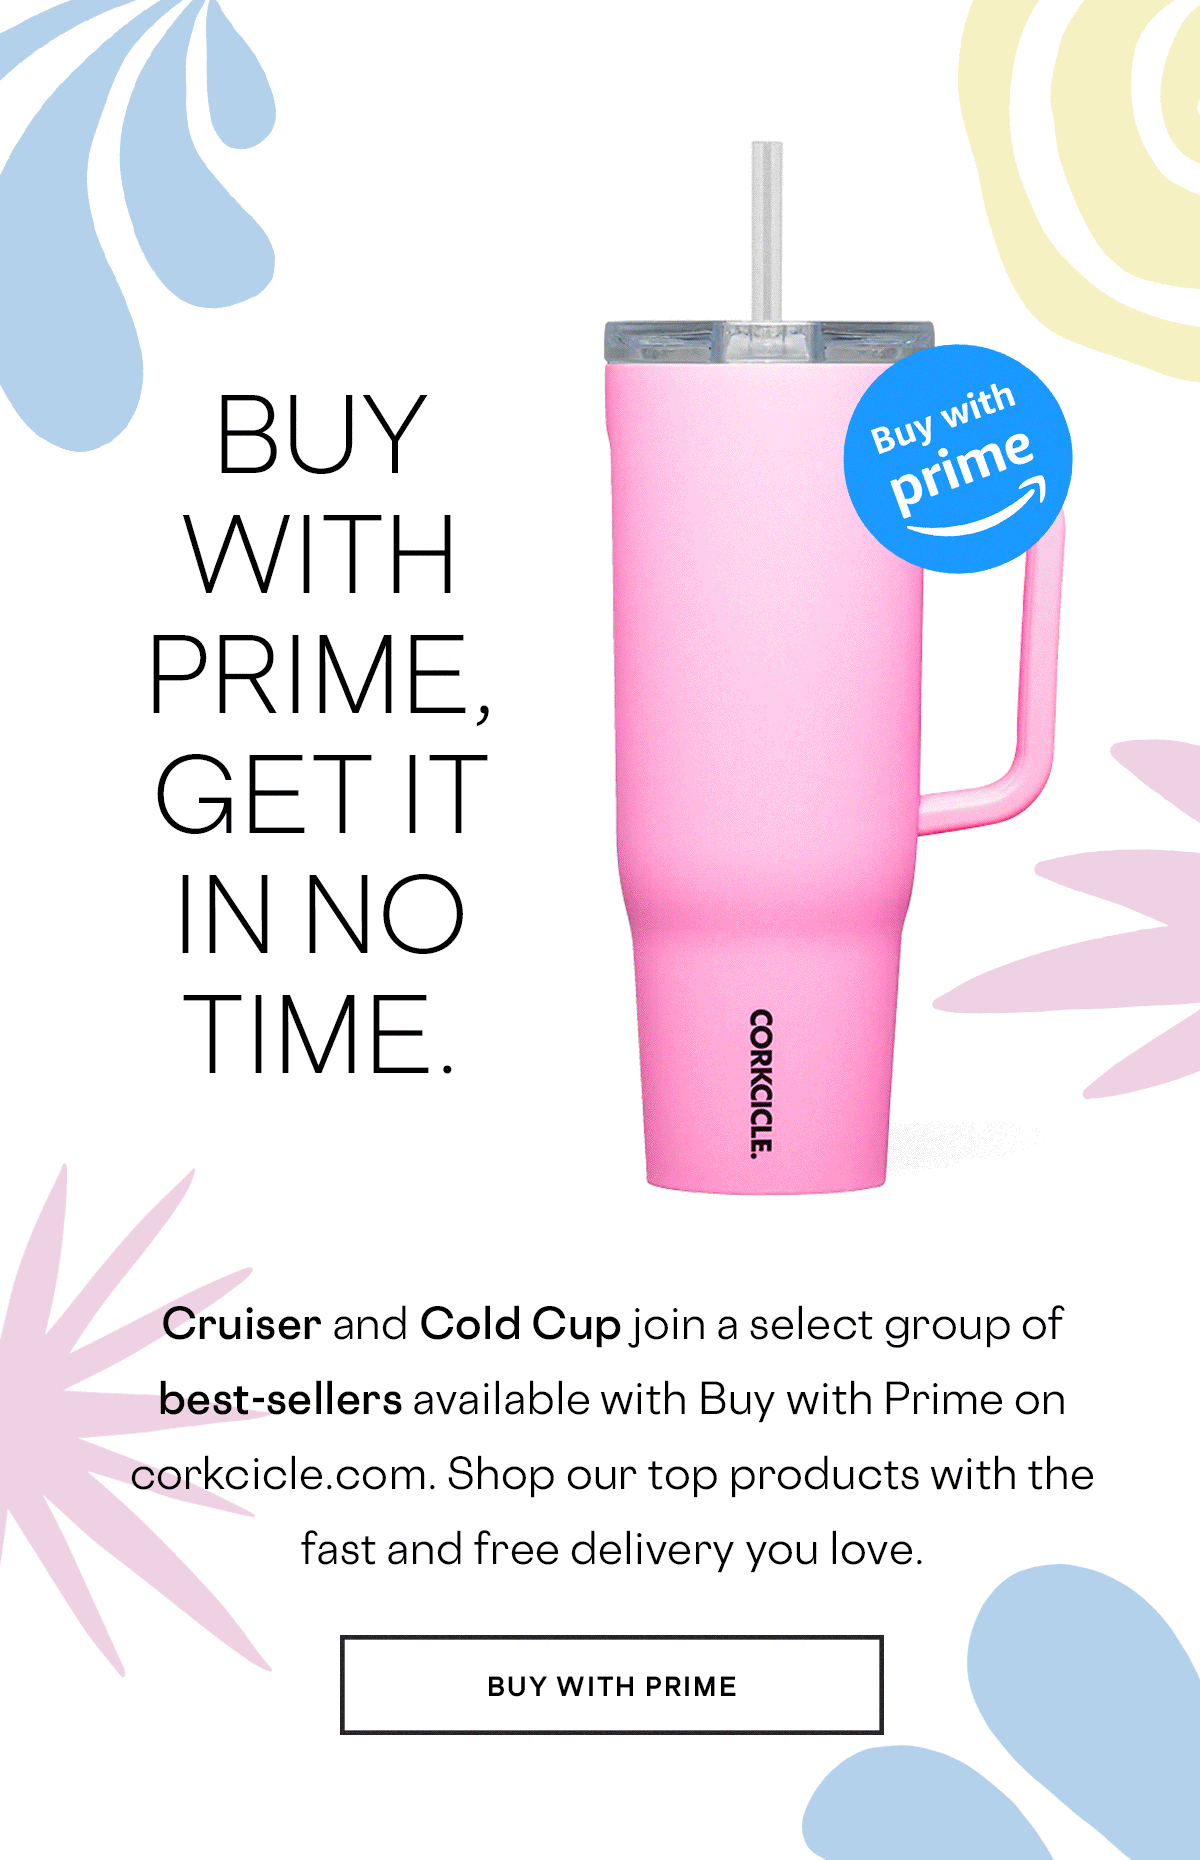 Cruiser and Cold Cup Are Now Available Through Buy With Prime